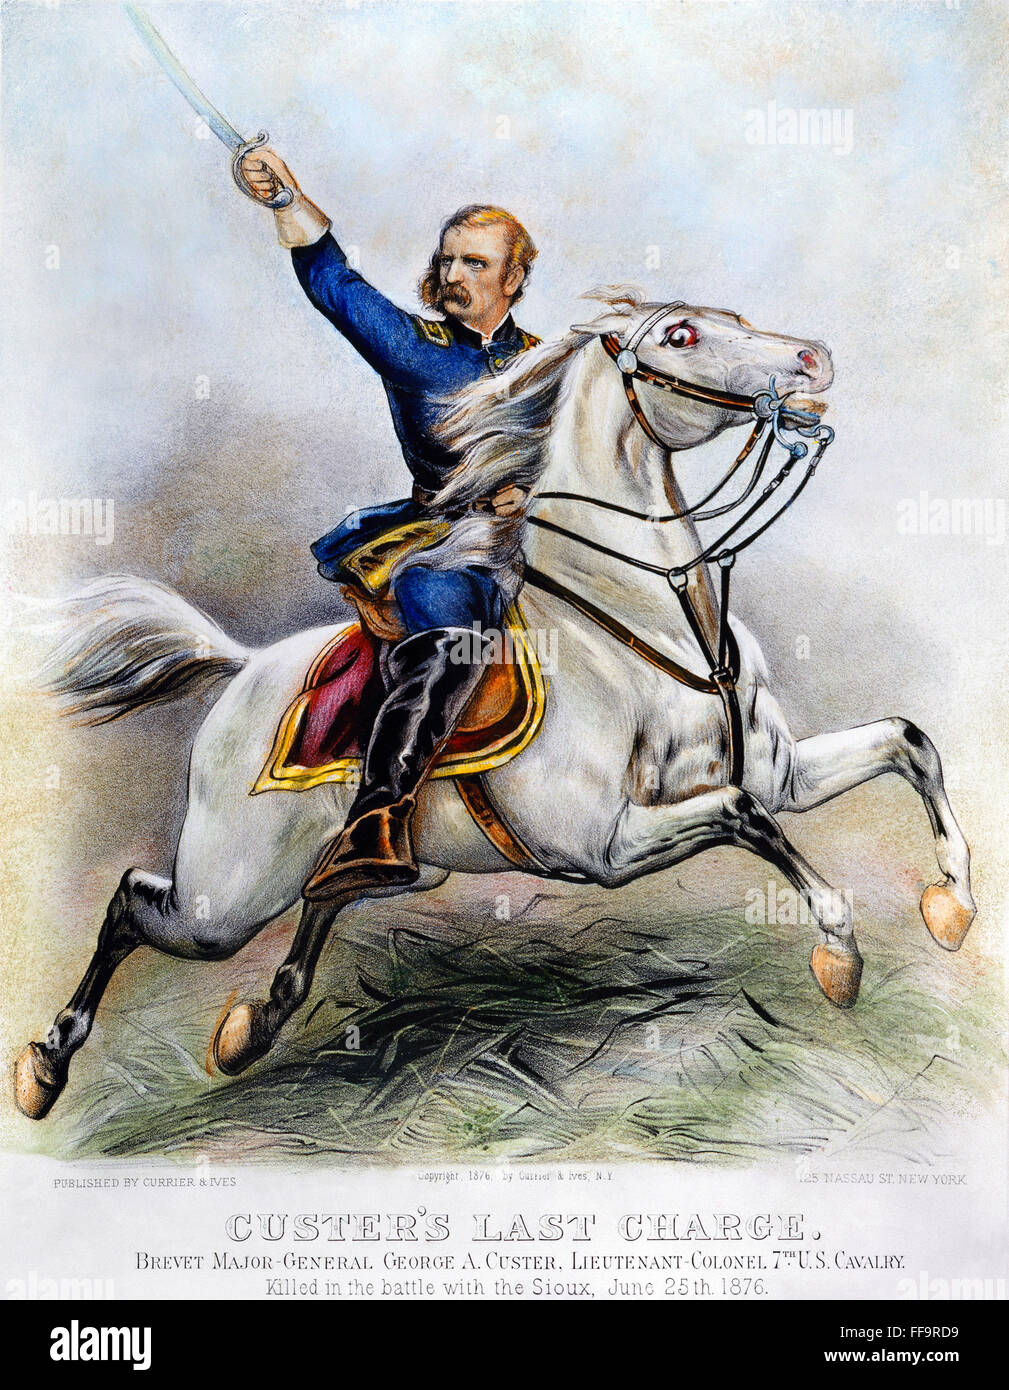 GEORGE ARMSTRONG CUSTER /n(1839-1876). Offizier der amerikanischen Armee. Custers letzte Ladung: Lithographie, 1876 von Currier & Ives. Stockfoto